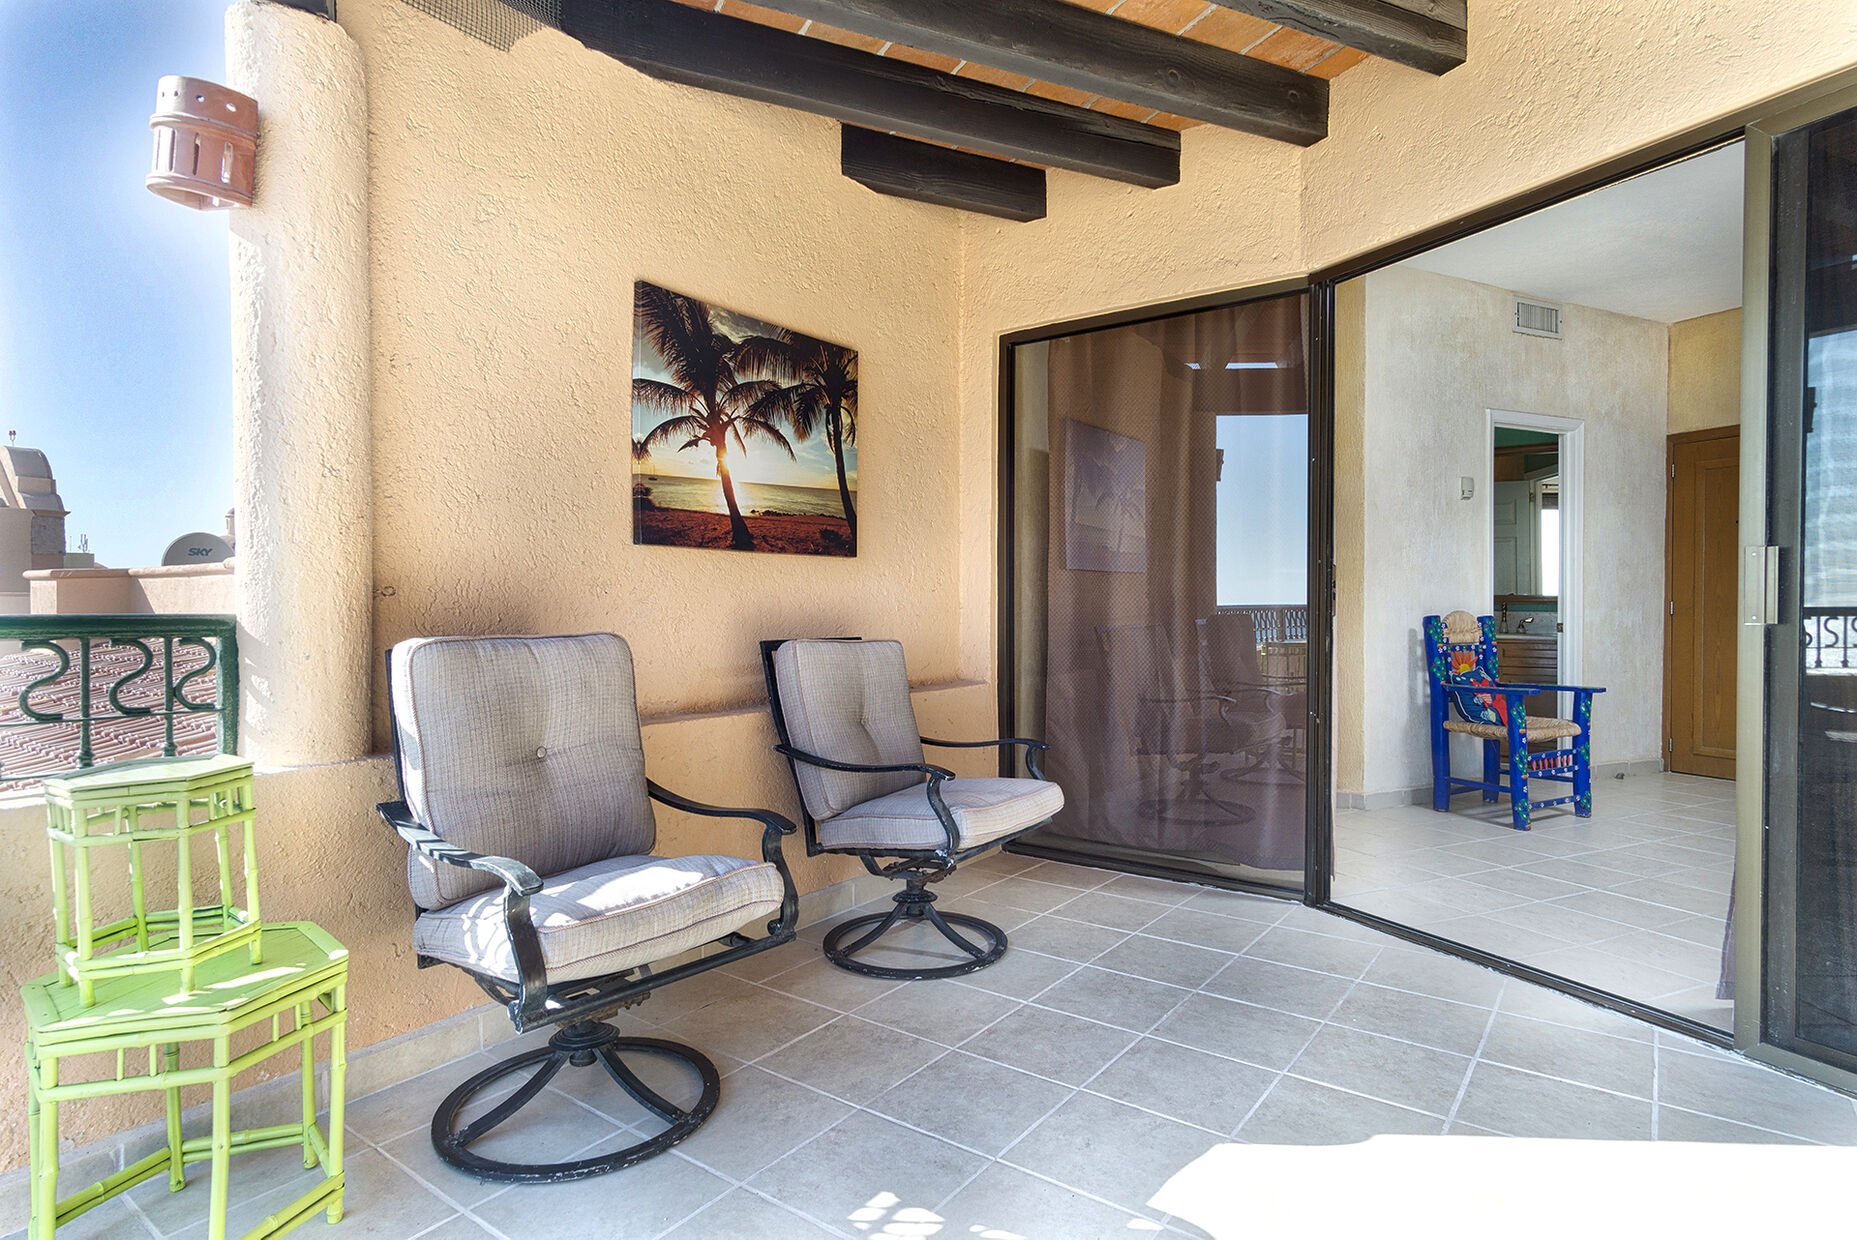 Casita has entrance from Grand Terrace and outdoor hallway